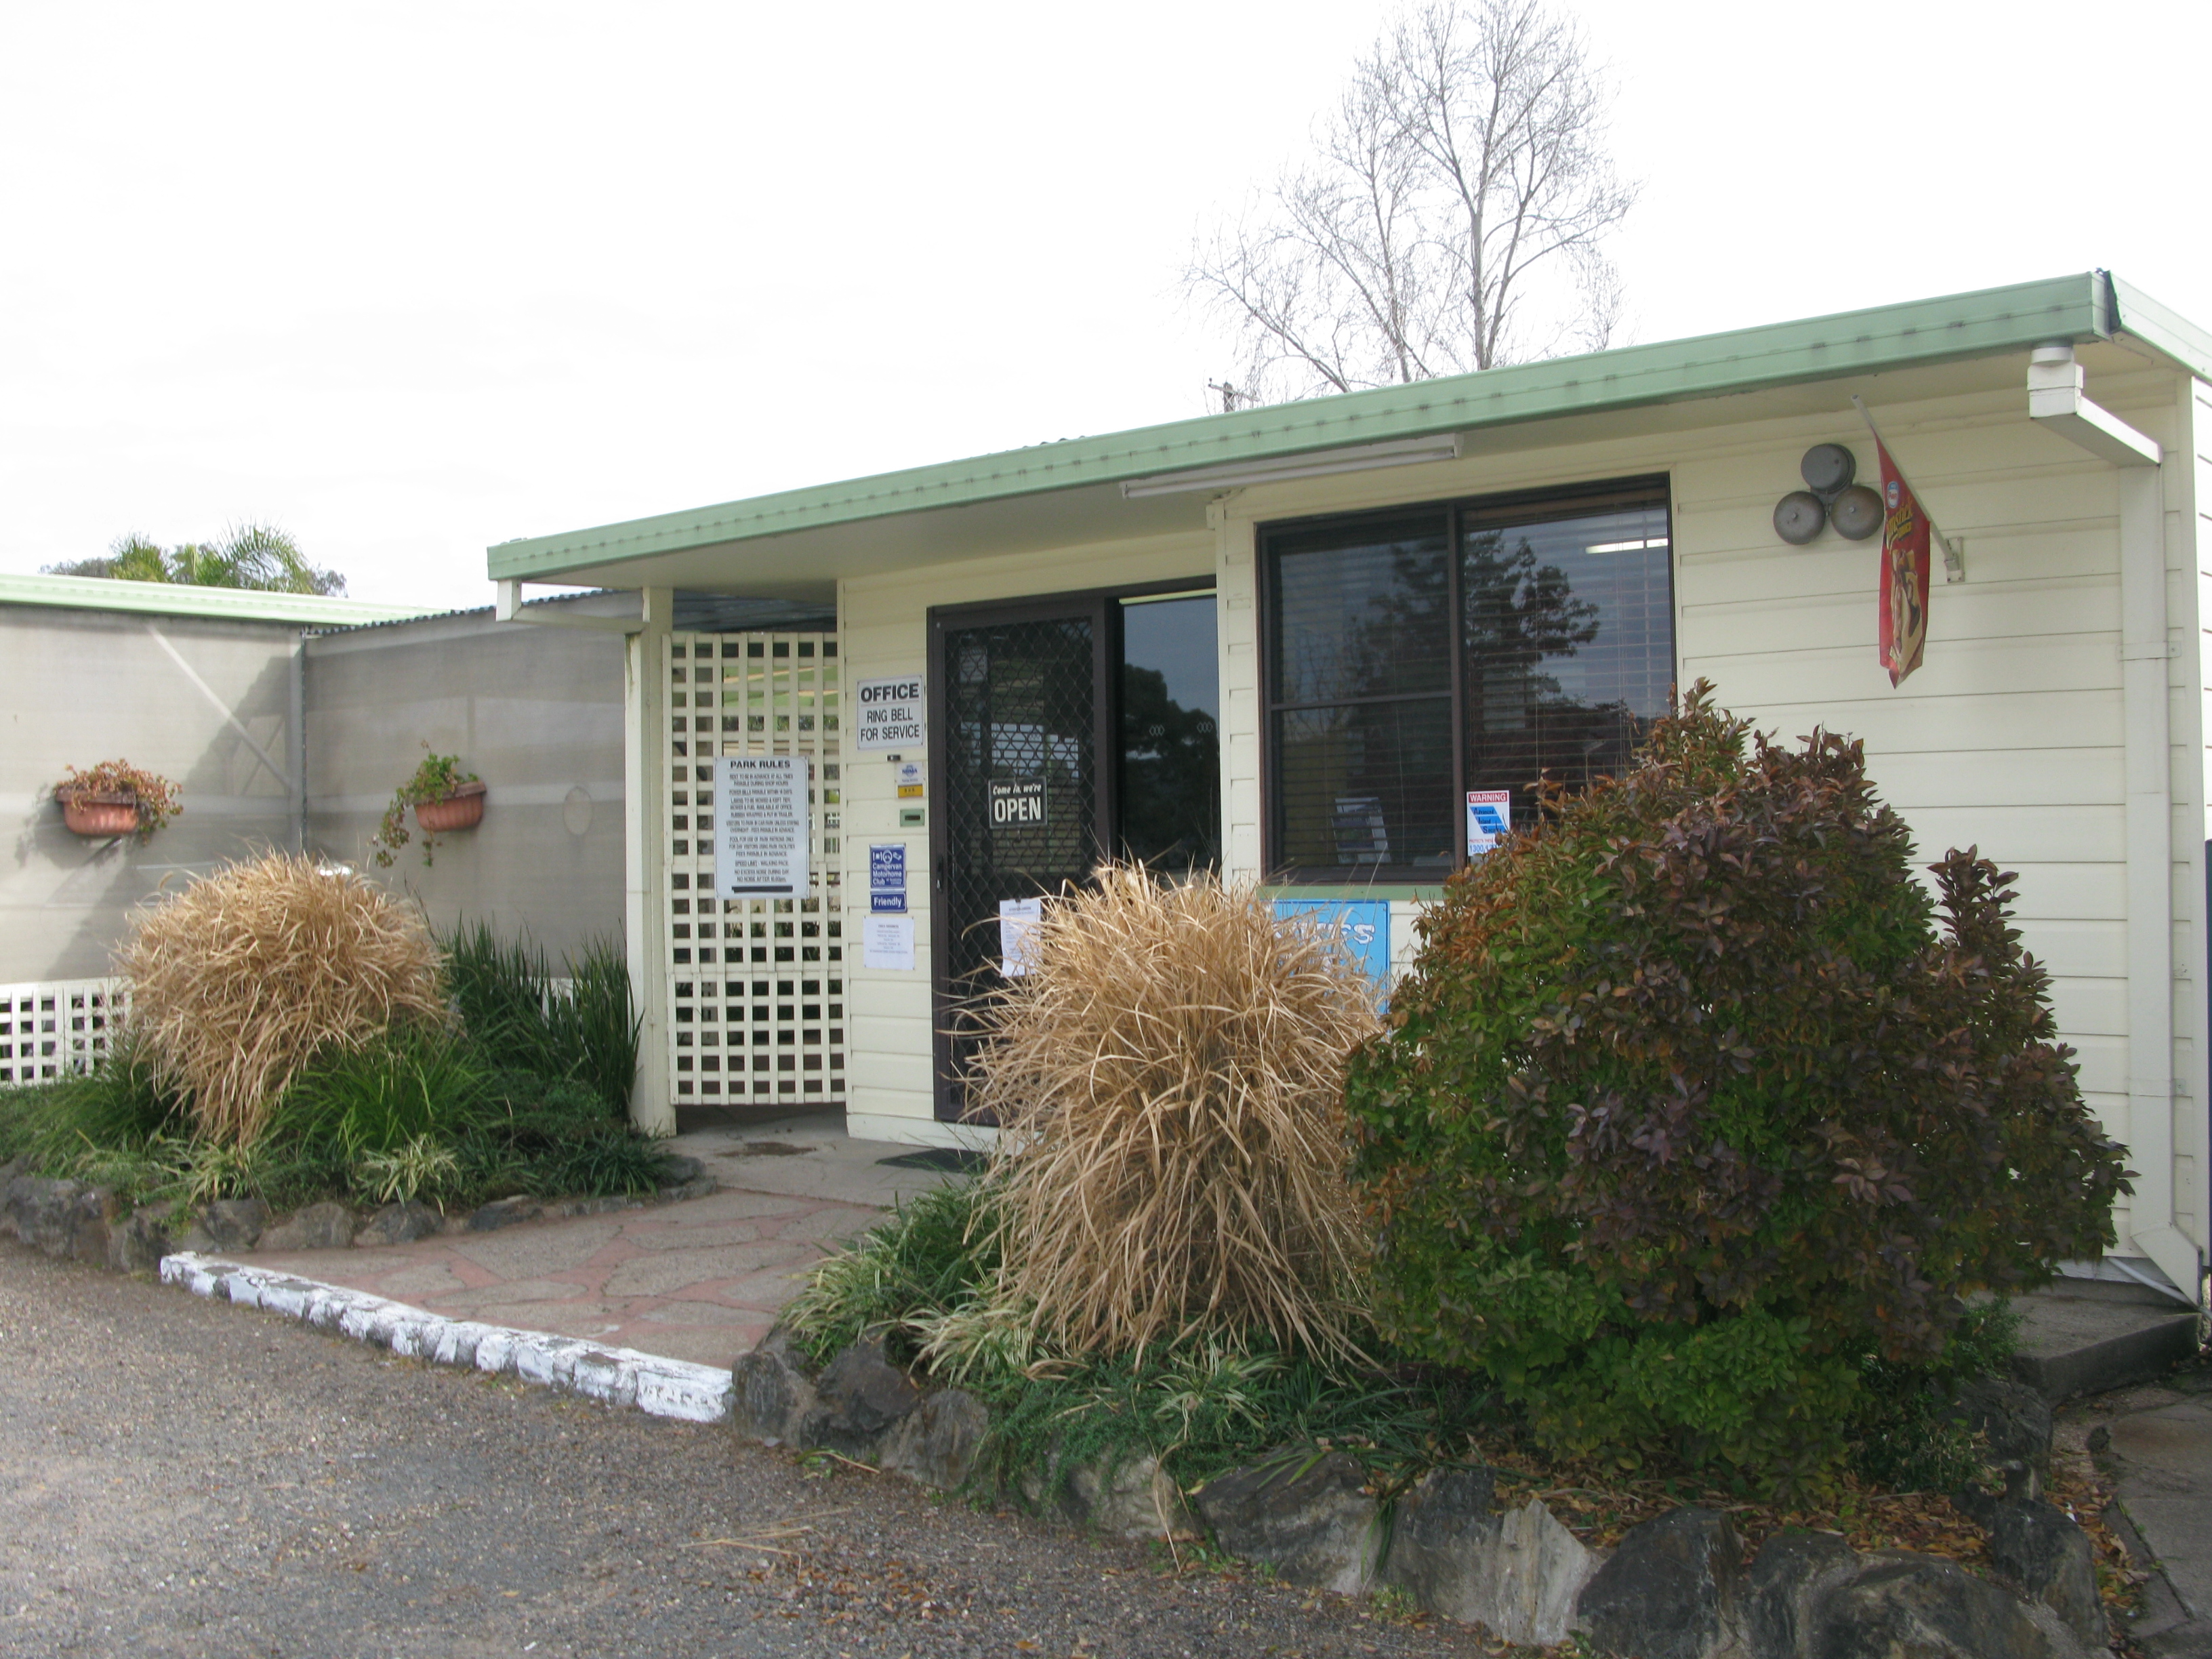 Kootingal Kourt Caravan Park - Kootingal: Reception and office where you will receive a cheerful welcome.